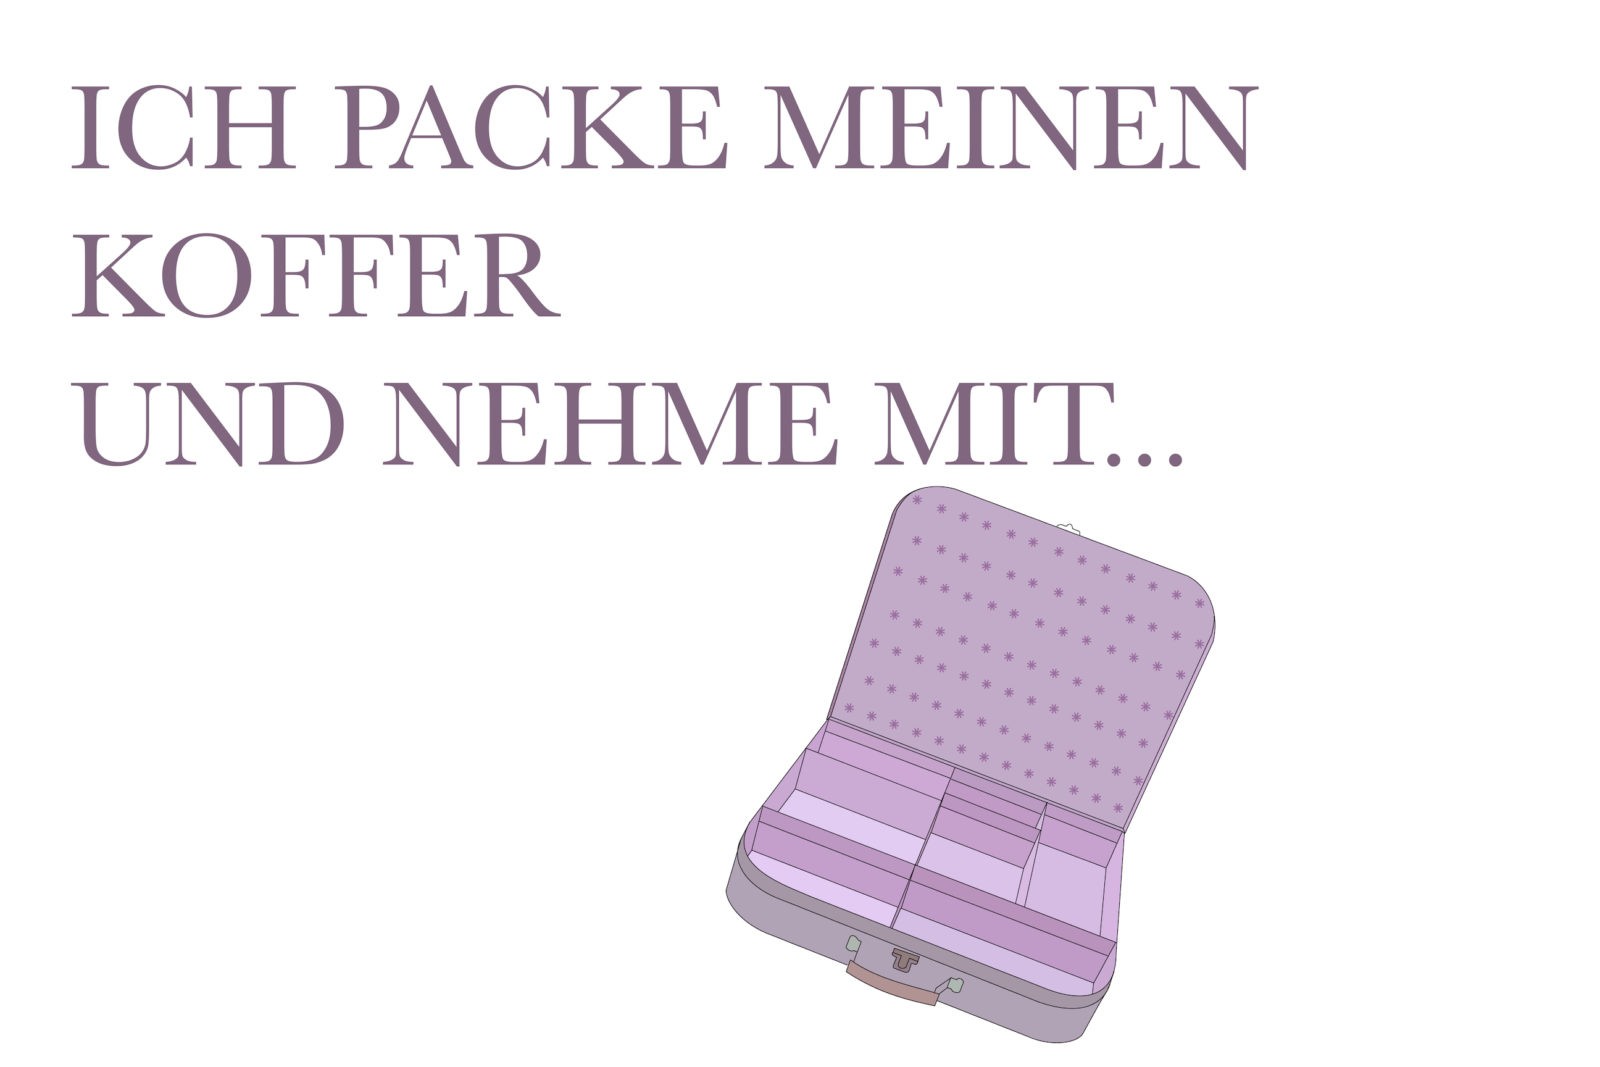 4 Tage noch – unsere ultimative Packliste :)